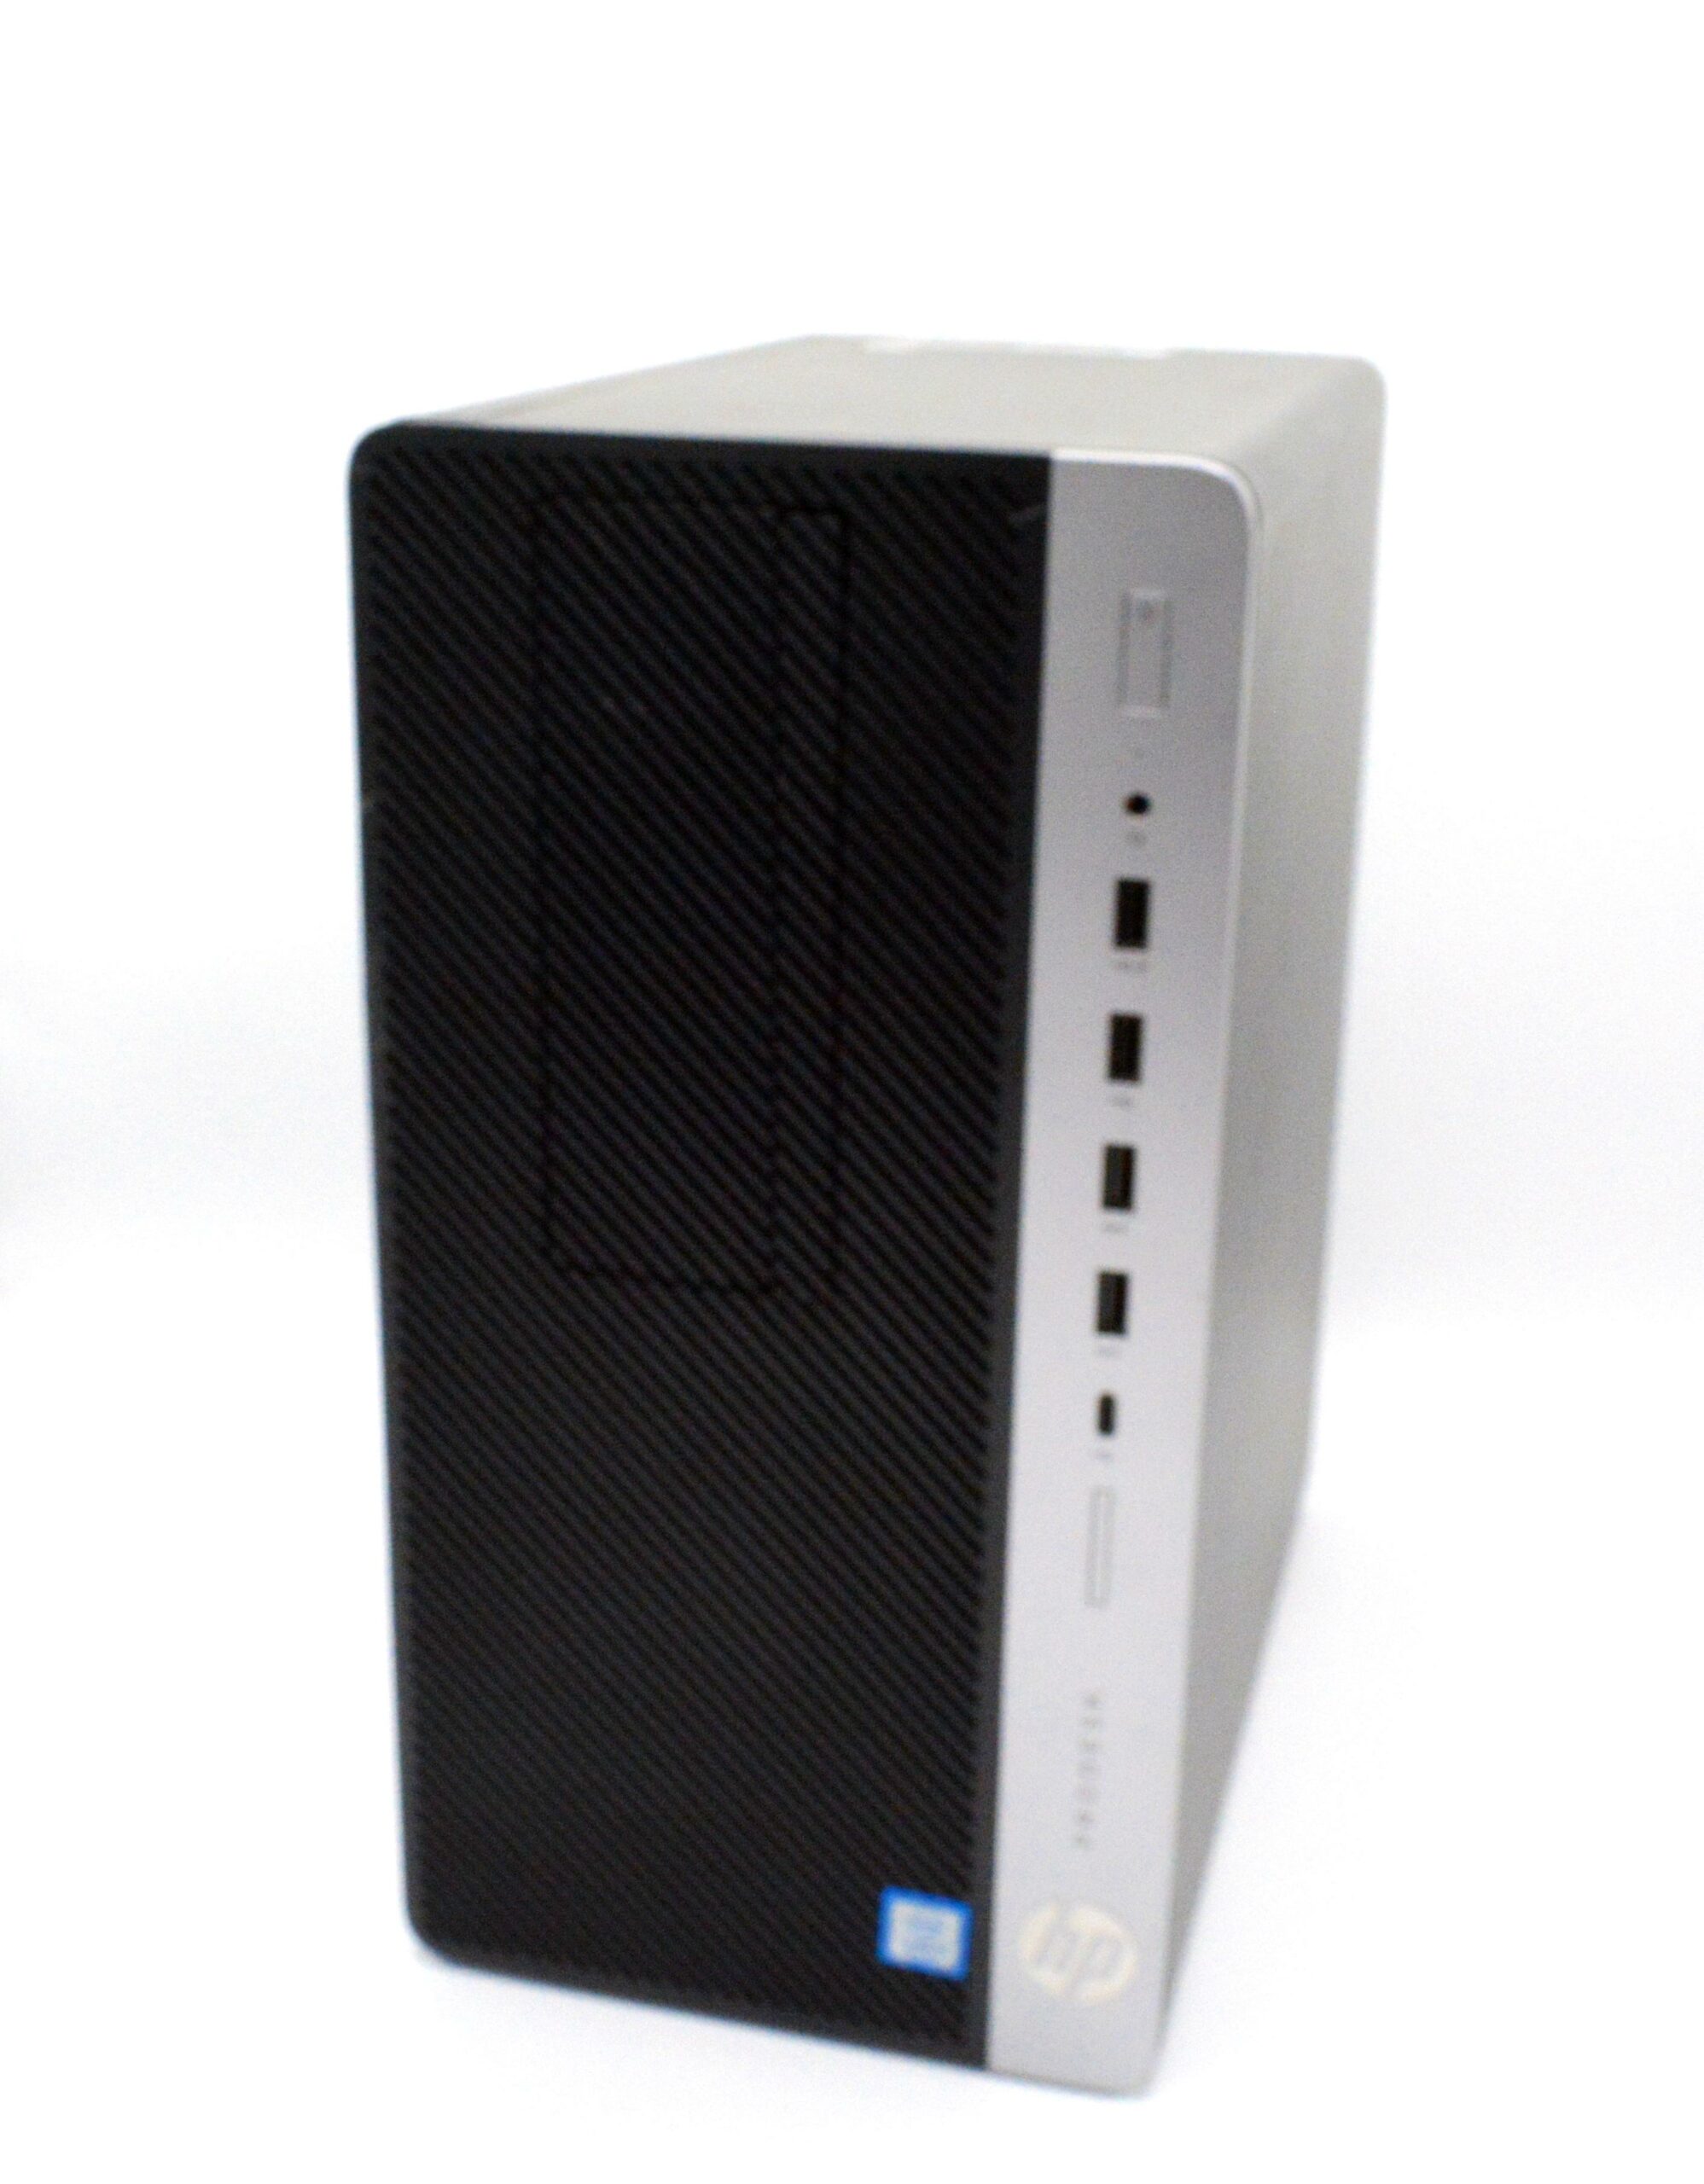 ProDesk 680 G4 Base Model Microtower PC (with PCI slot)